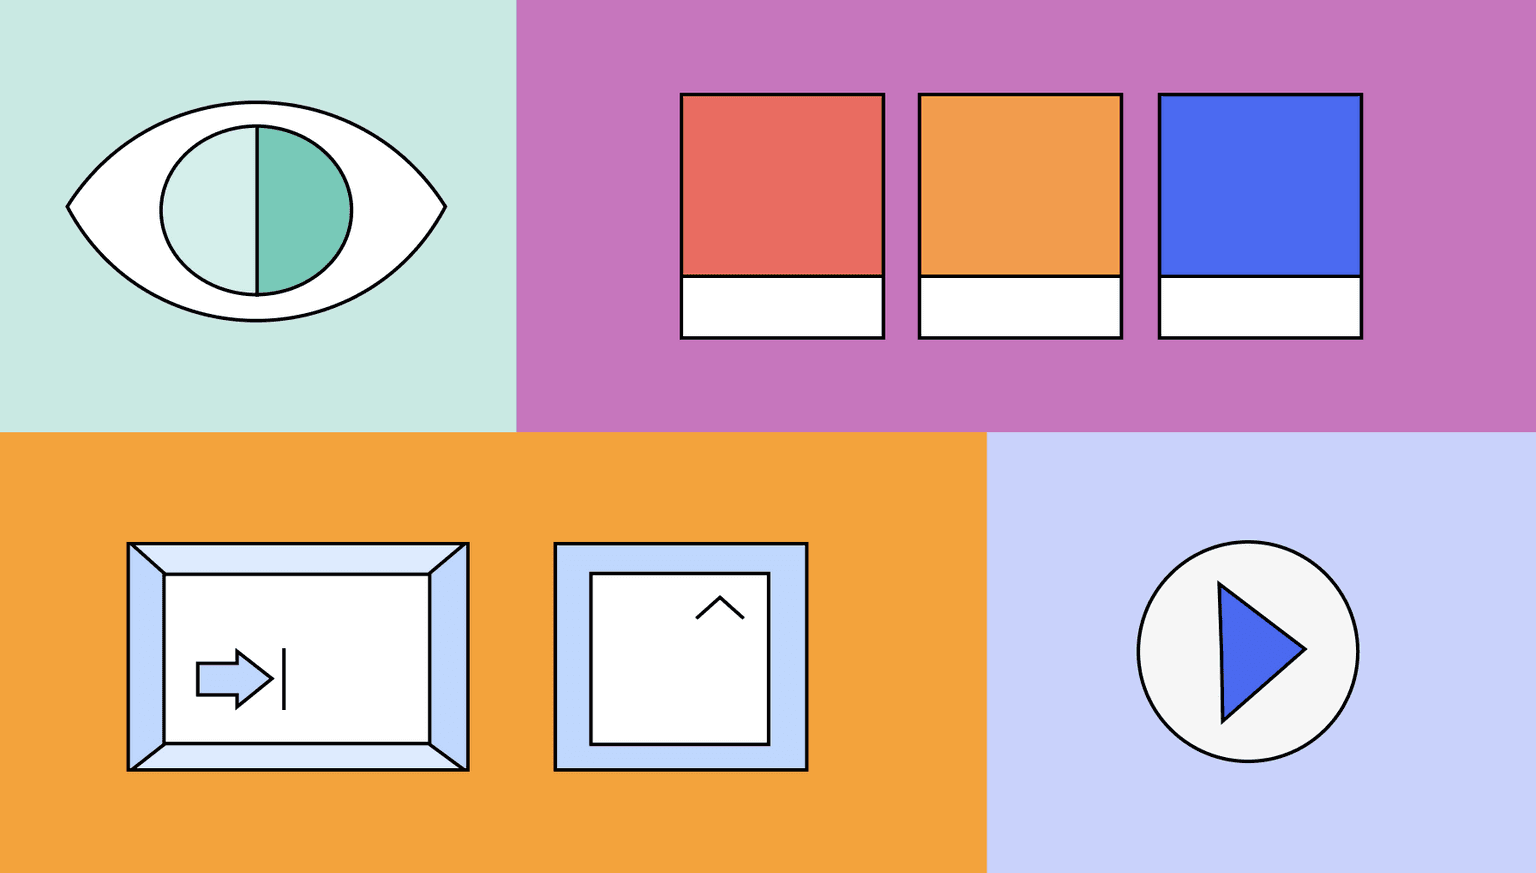 Illustration of low vision represented by an eye, accessible color palette showing red, orange and blue, keyboard navigation shown with shift and control buttons and an icon for play.